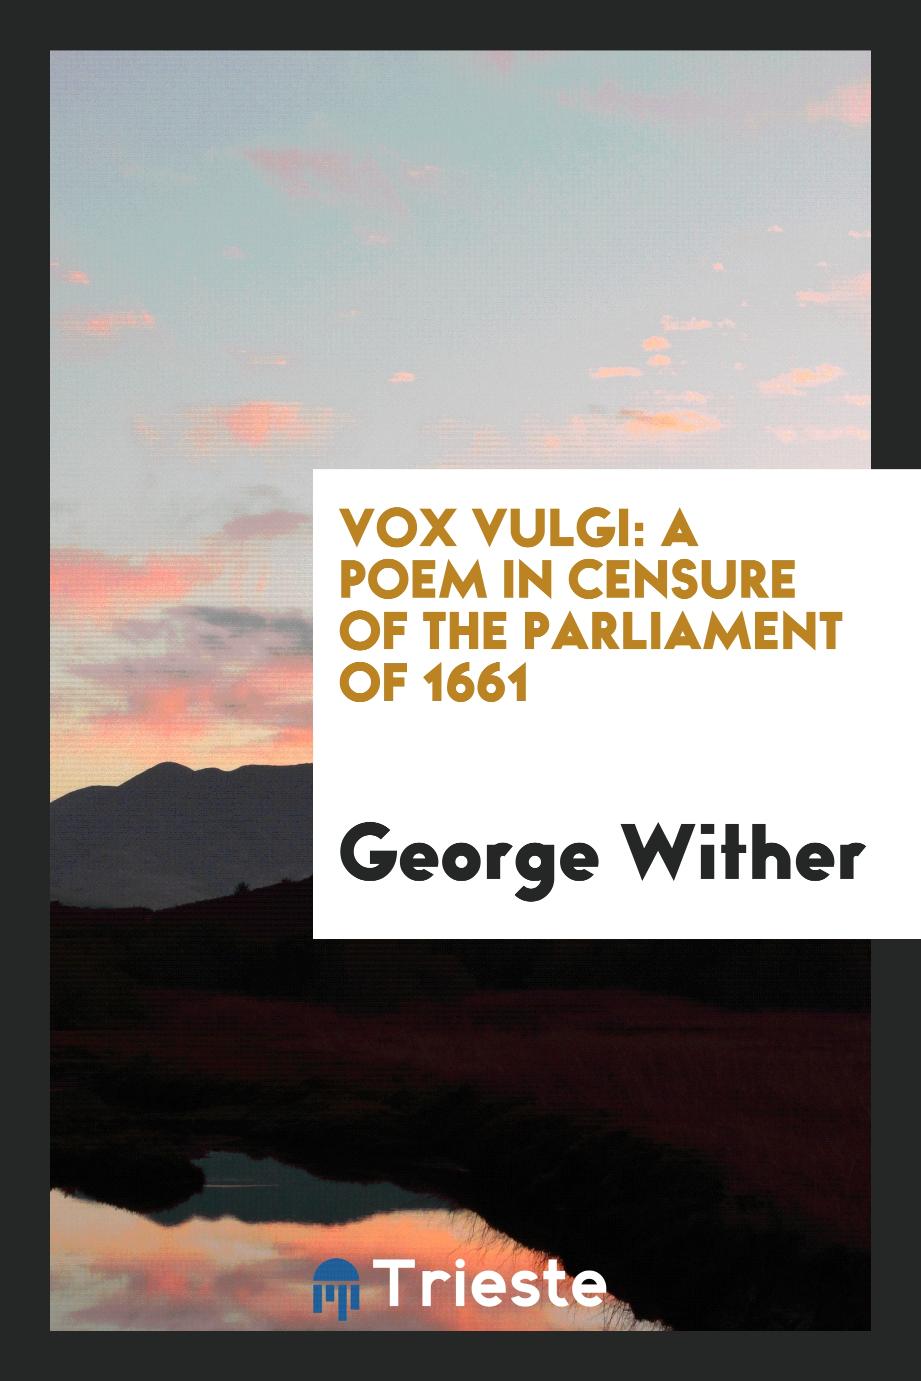 Vox vulgi: a poem in censure of the parliament of 1661